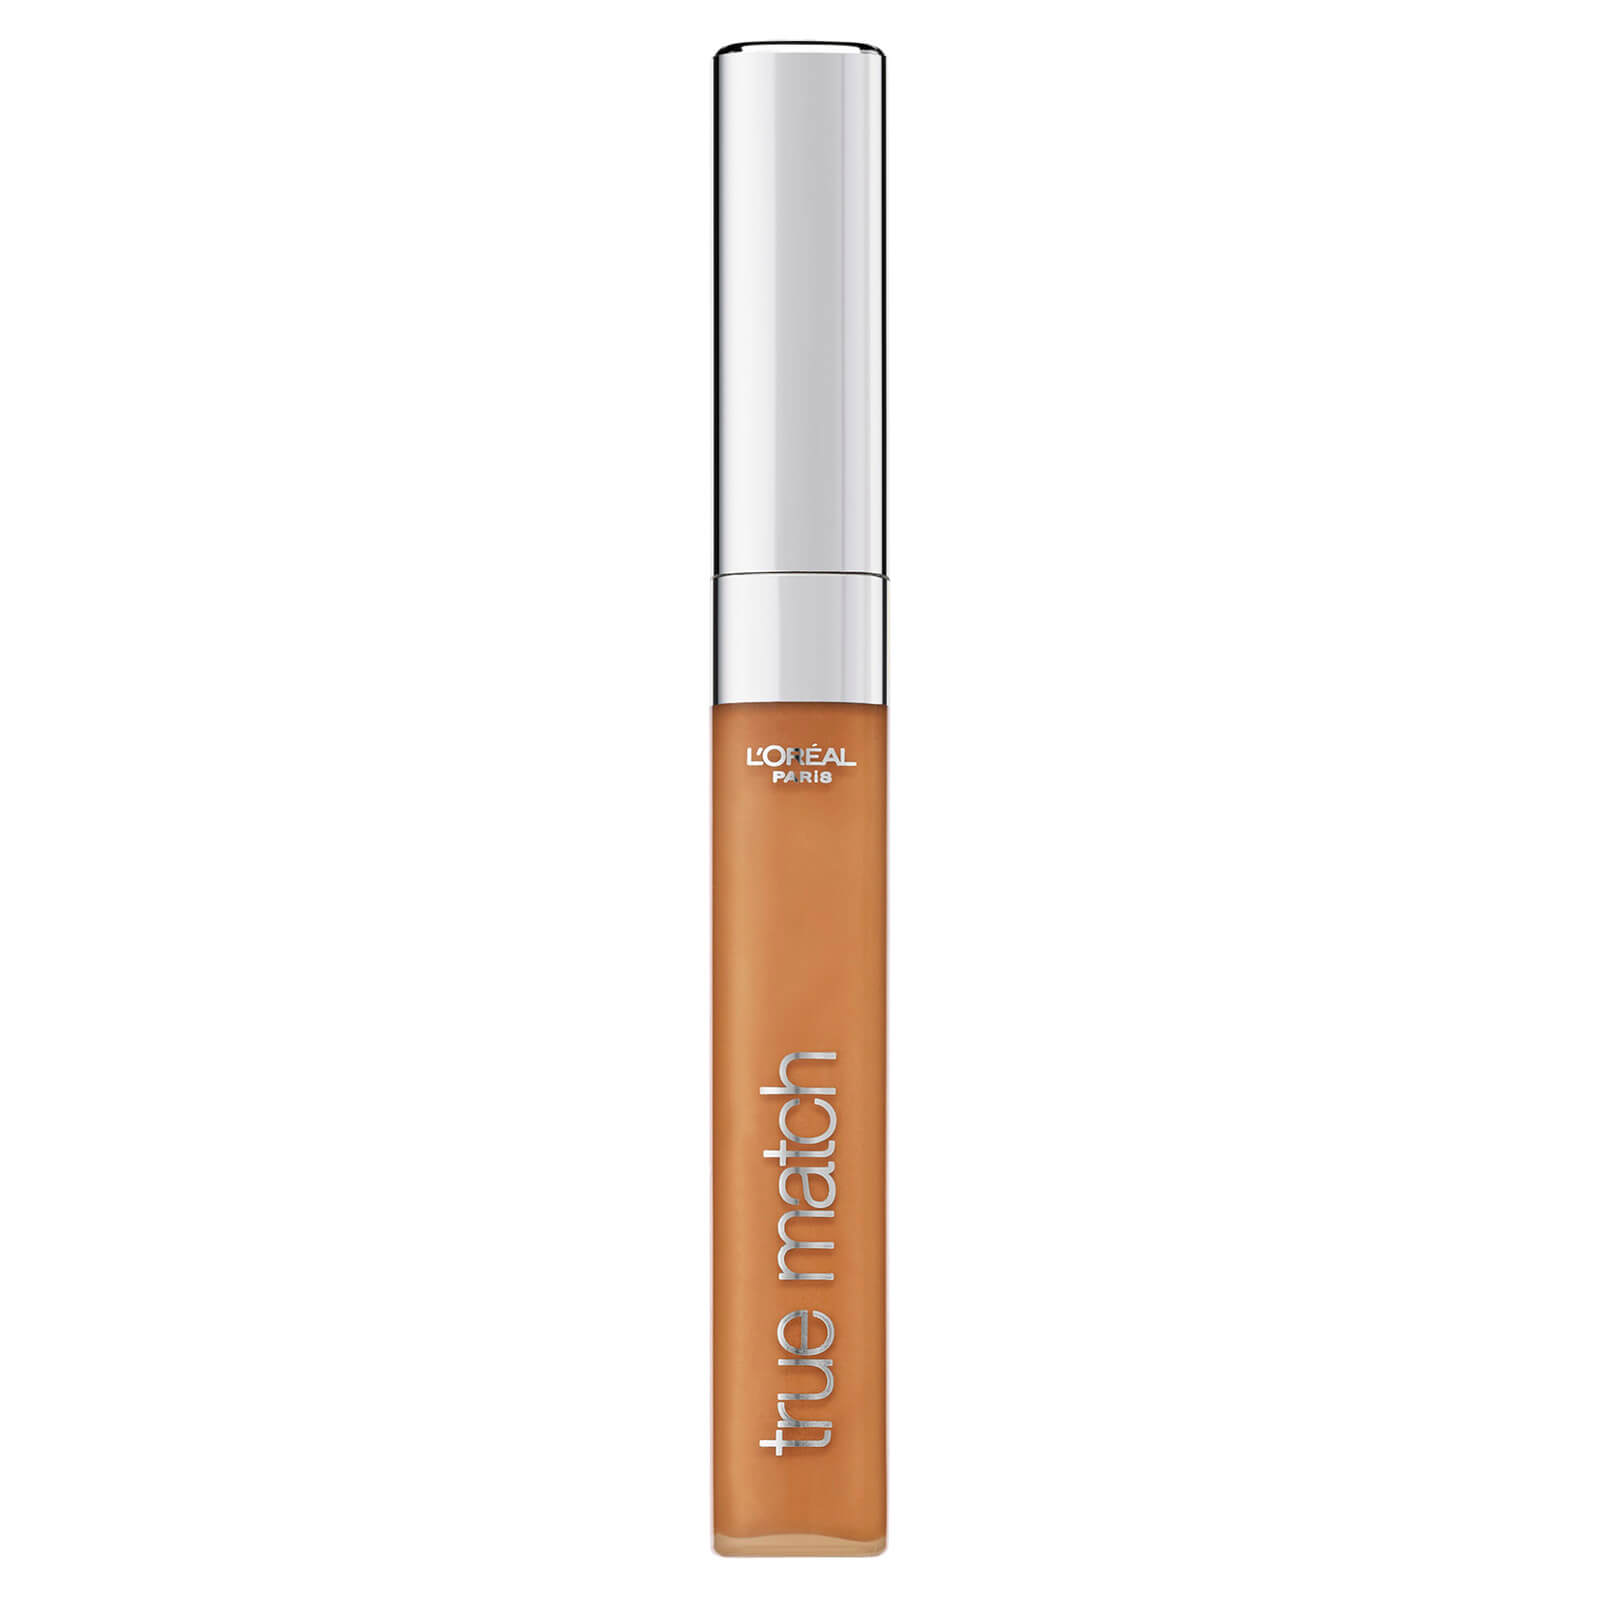 L'Oréal Paris True Match The One Concealer 6.8ml (Various Shades) - 7W Gold Amber